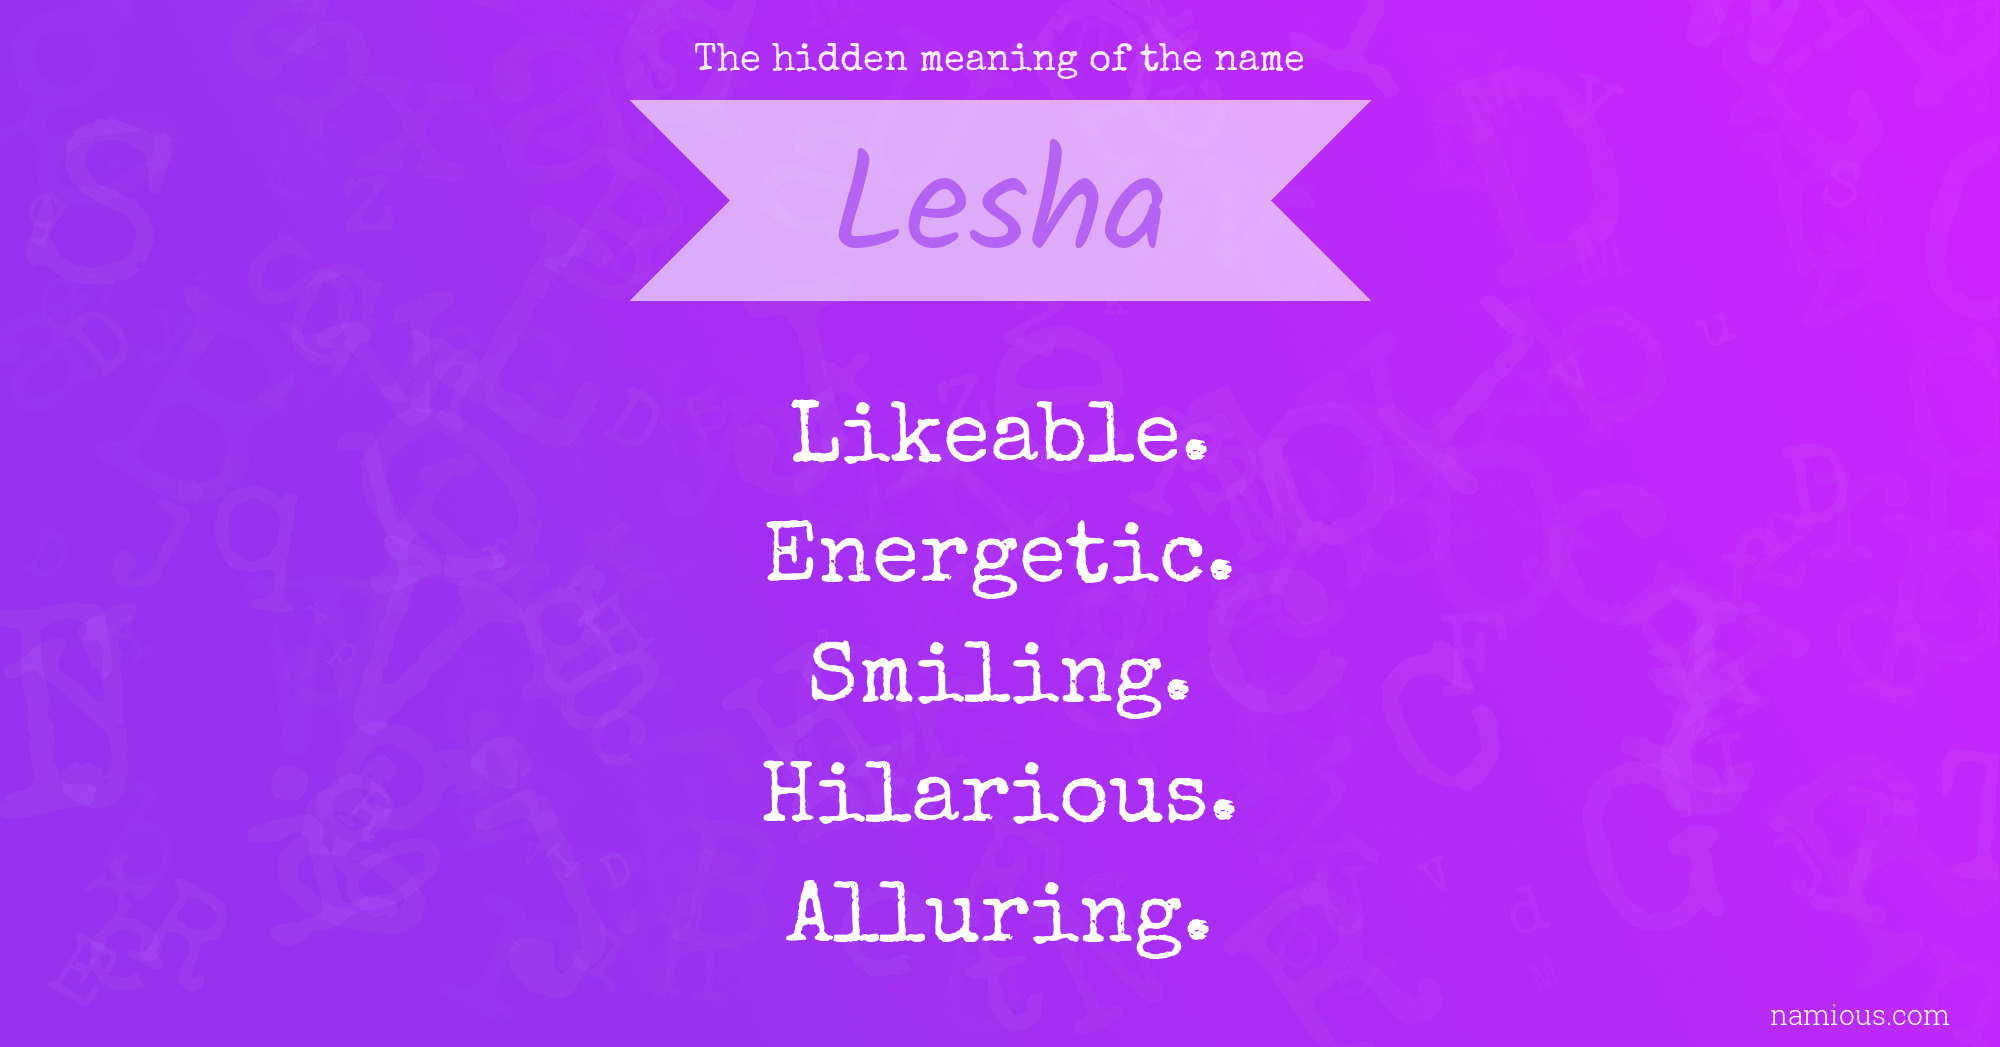 The hidden meaning of the name Lesha